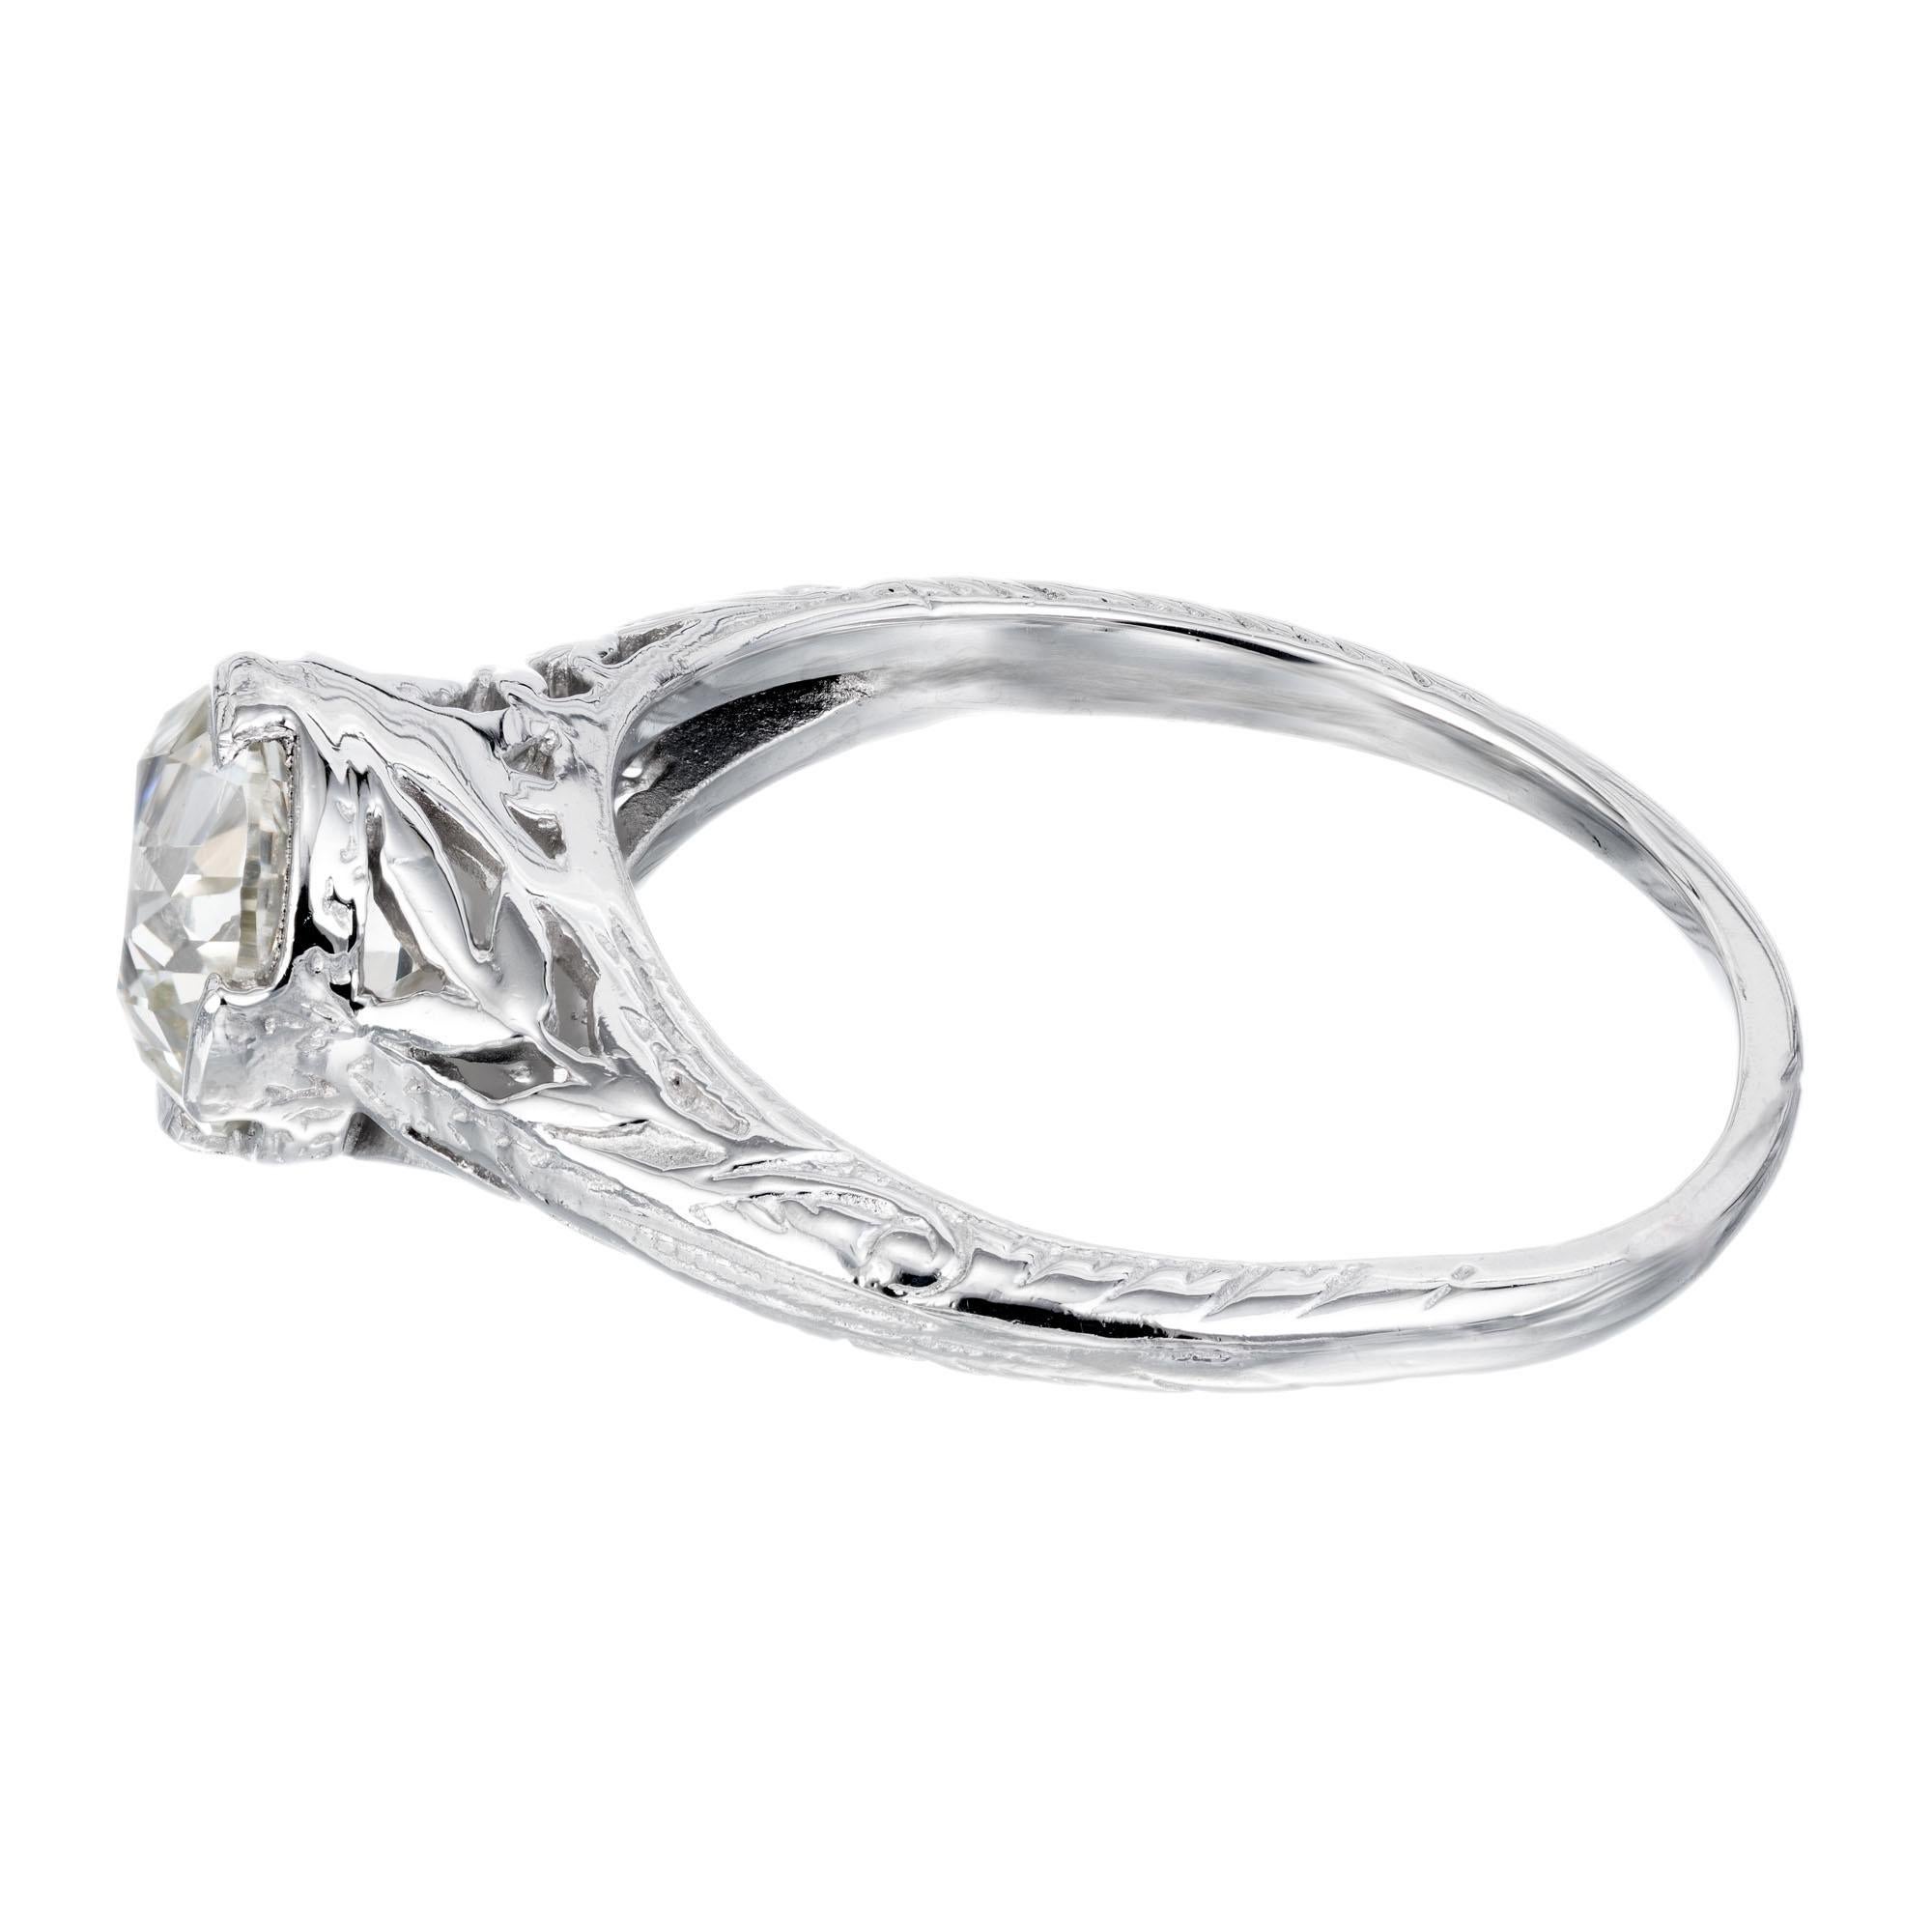 EGL Certified 1.36 Carat Diamond Platinum Art Nouveau Engagement Ring In Excellent Condition For Sale In Stamford, CT